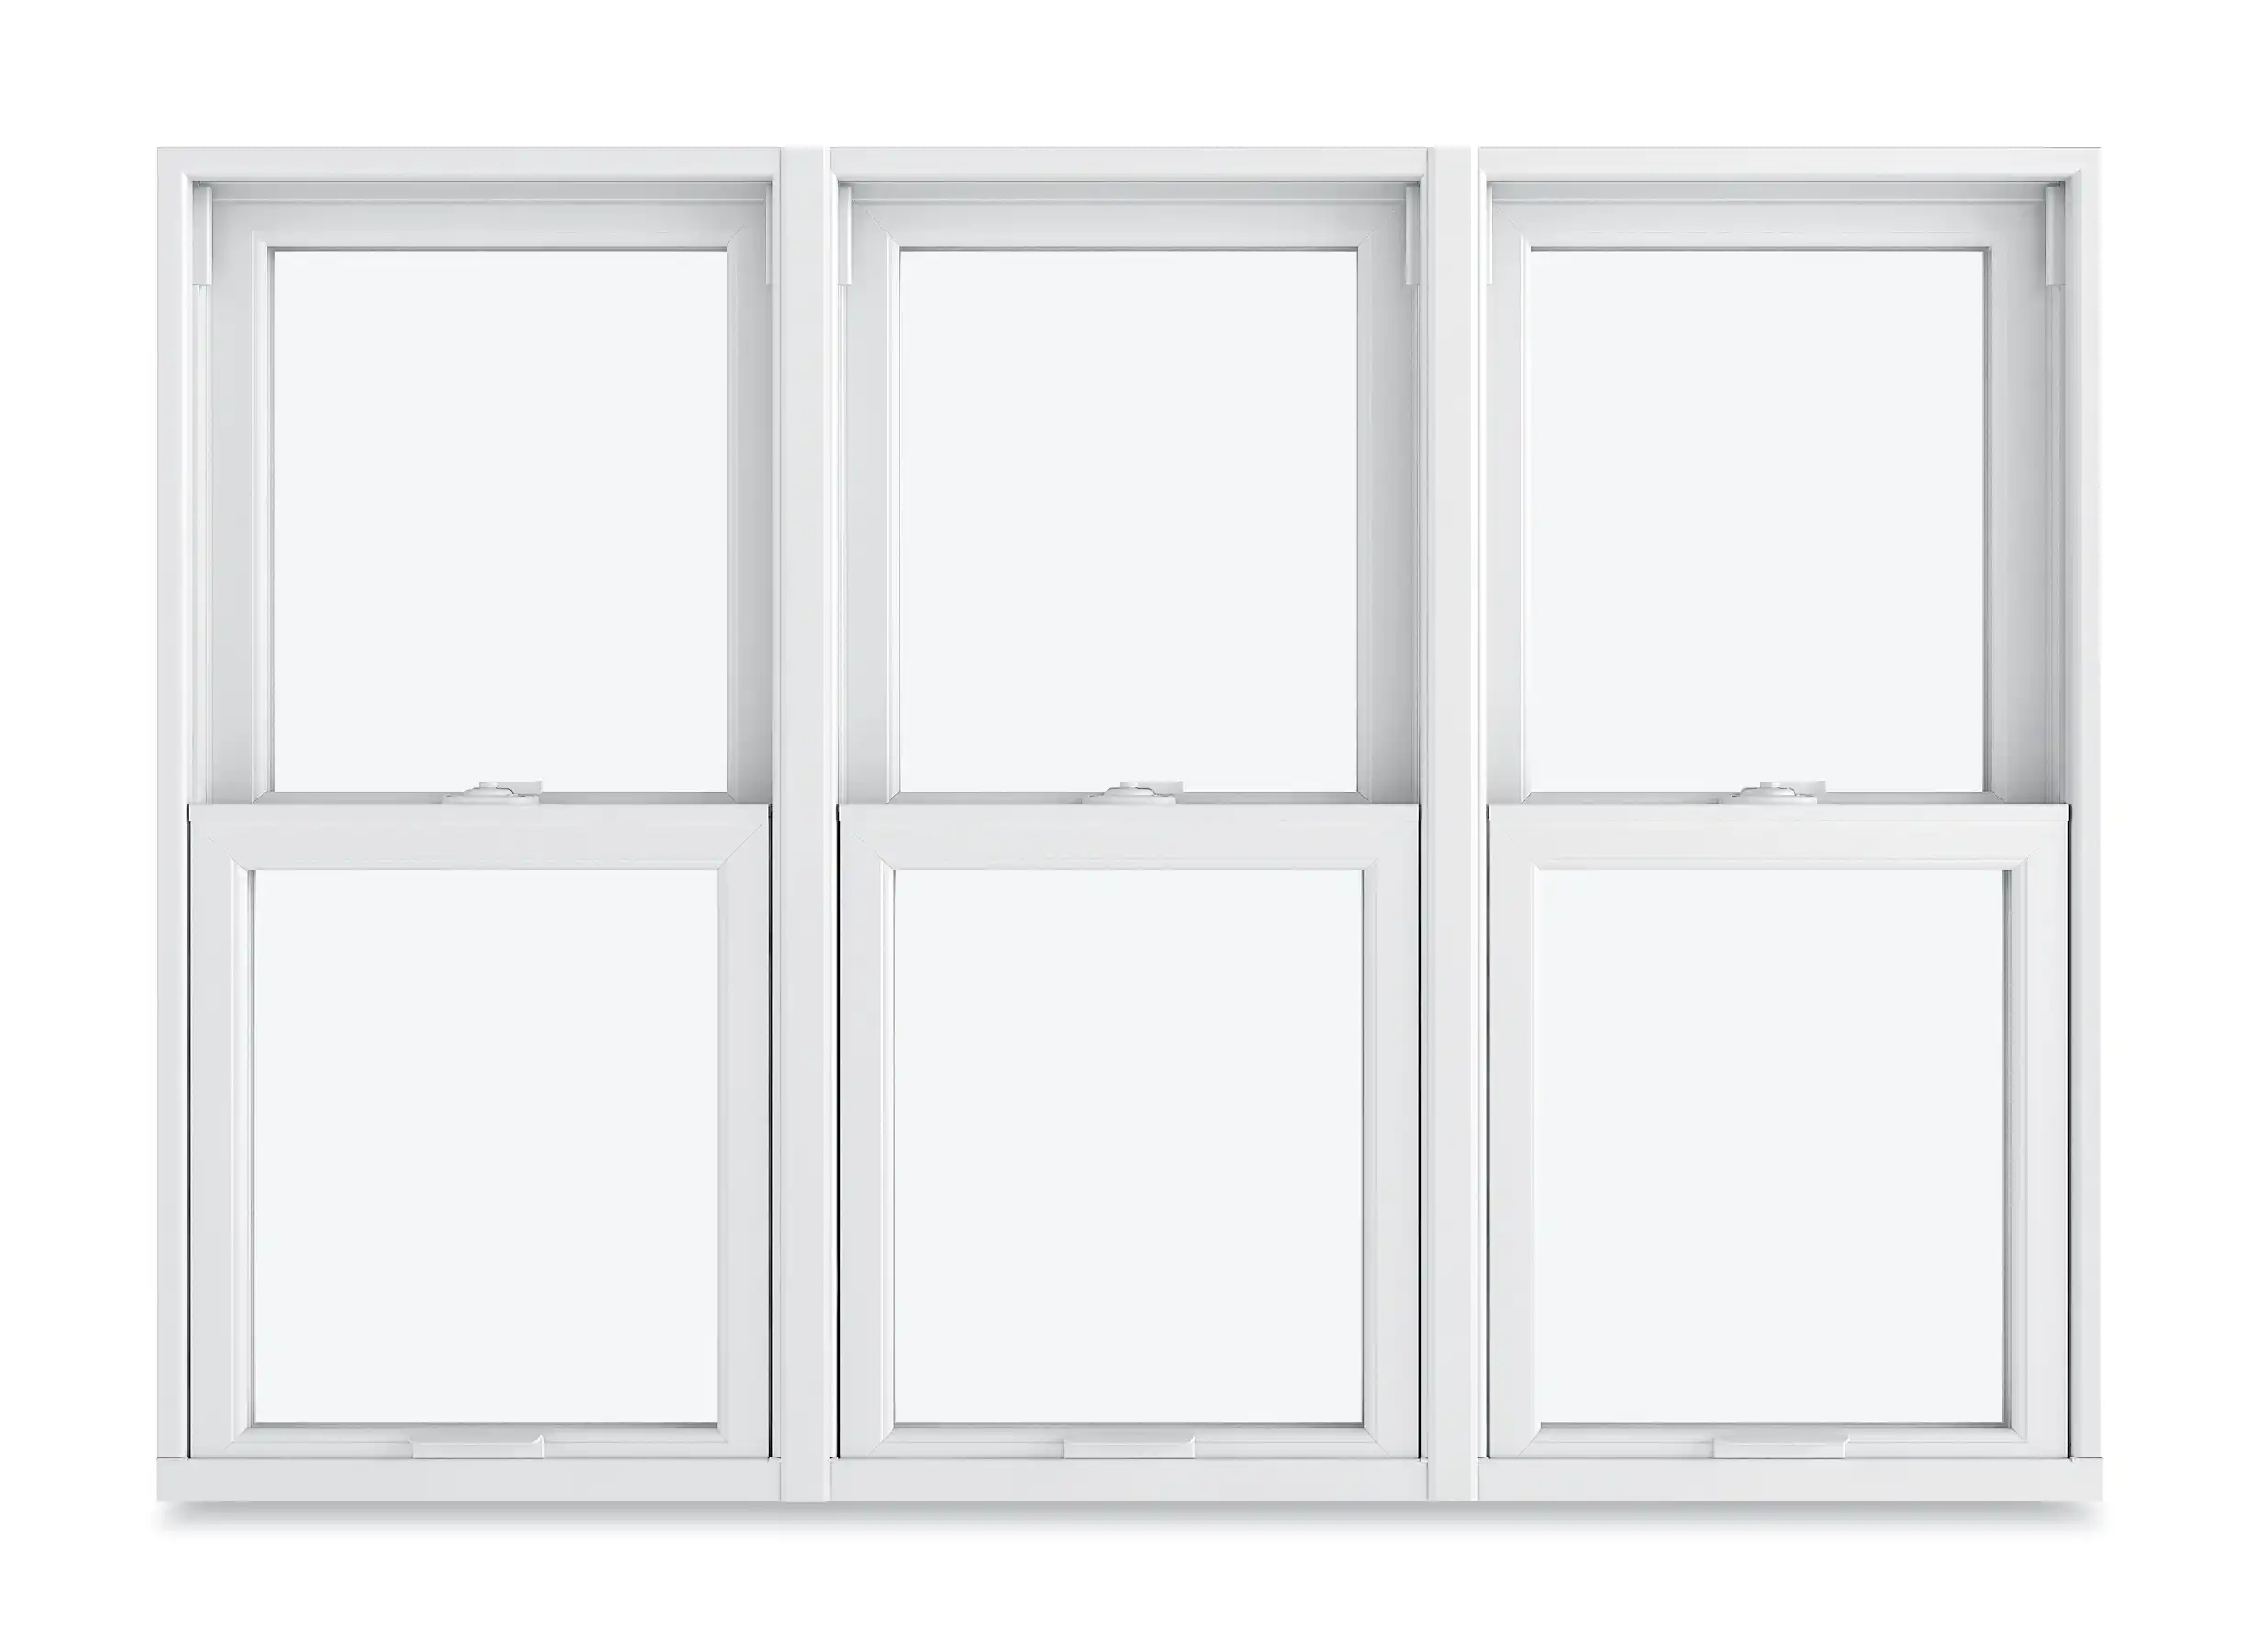 Image of three Marvin Replacement Double Hung windows mulled together.